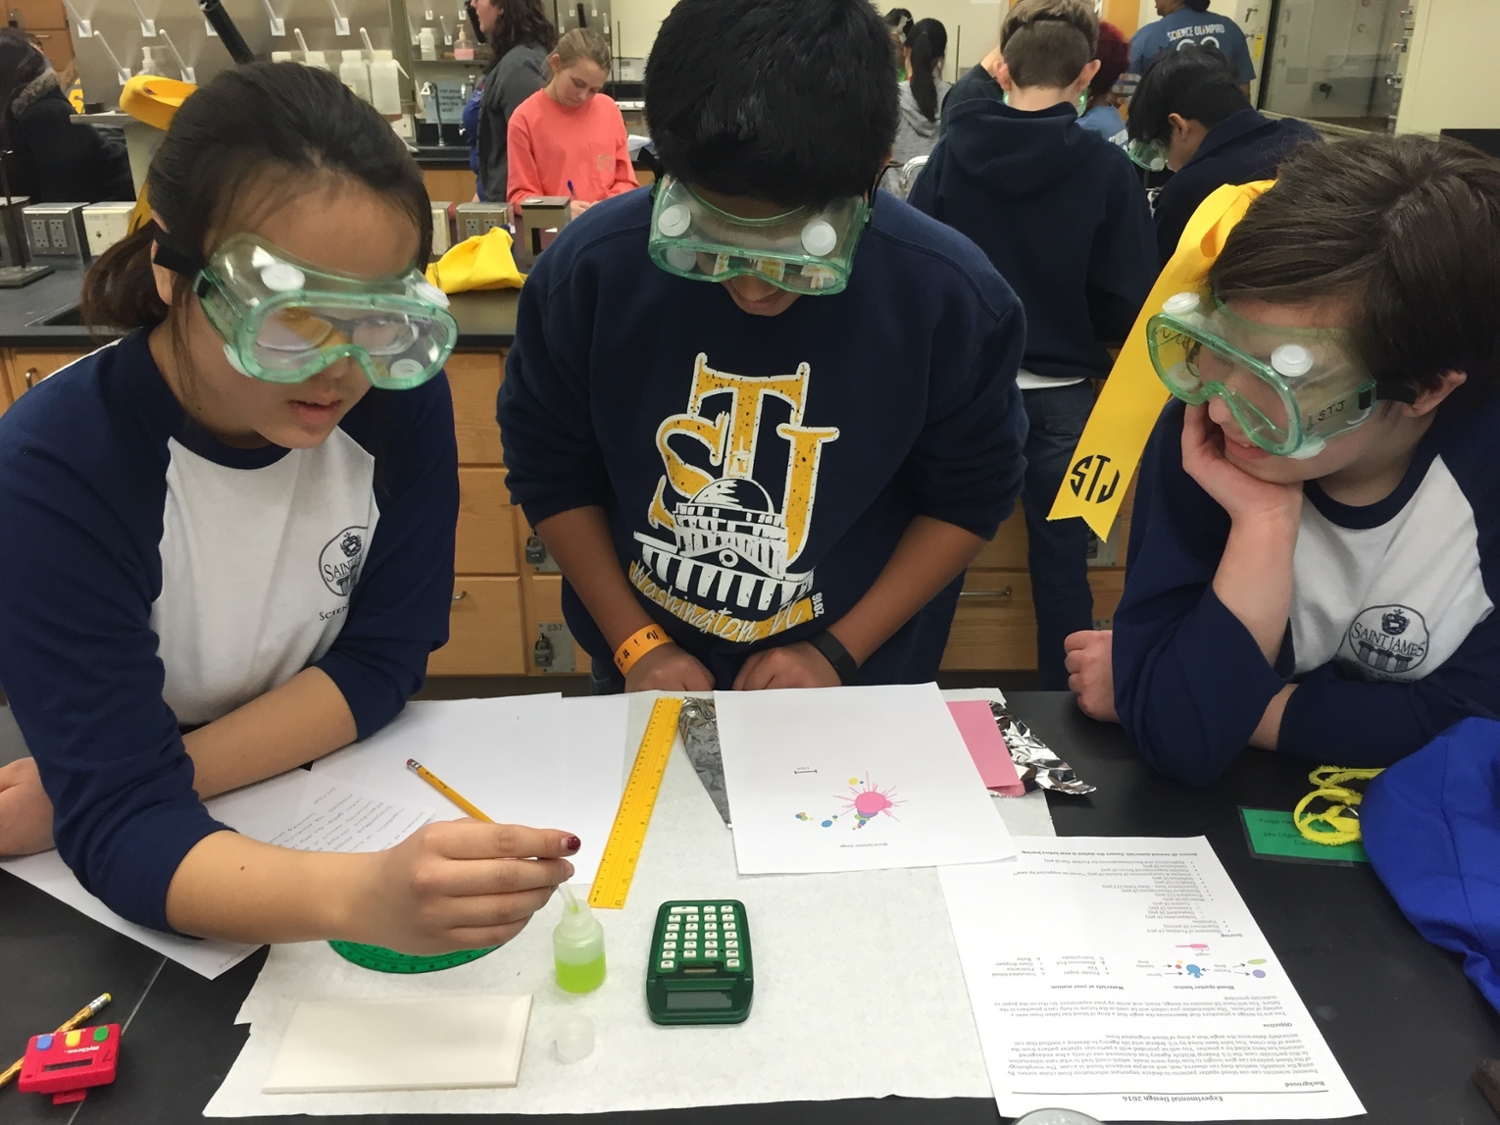 three science olympiad students with googles working at a lab table